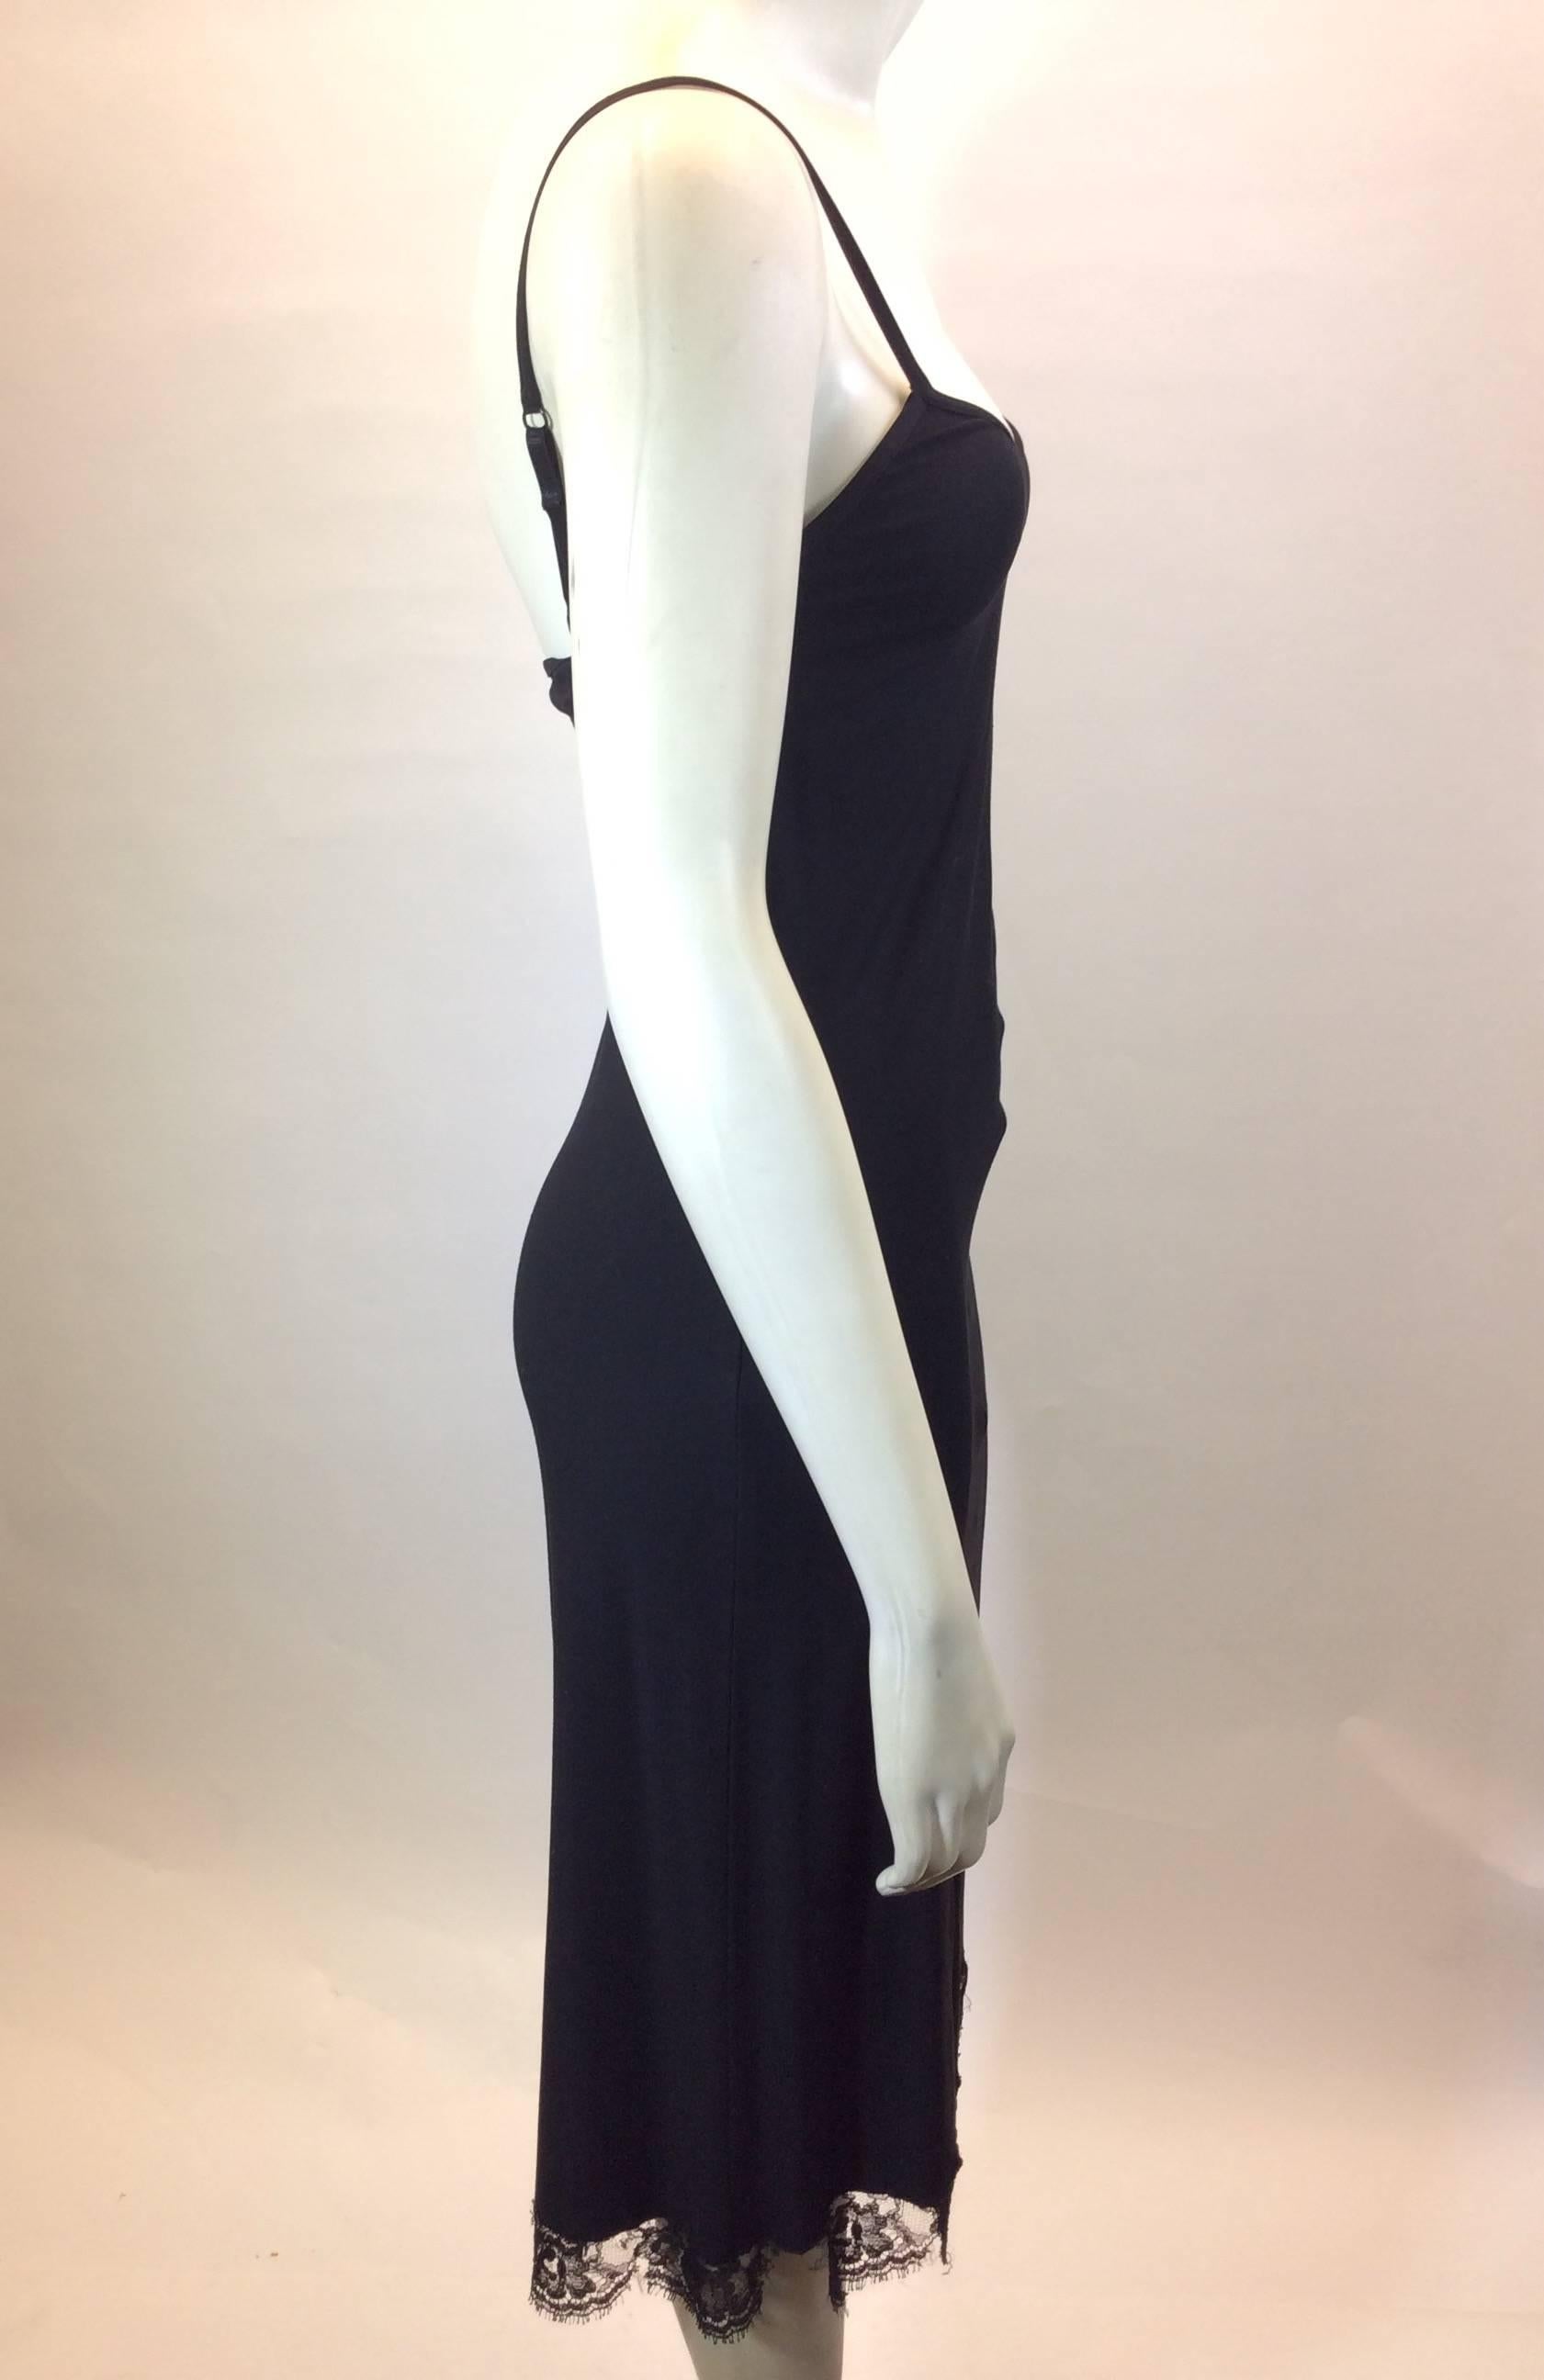 Gucci Black Lace Trim Size Dress In Excellent Condition For Sale In Narberth, PA